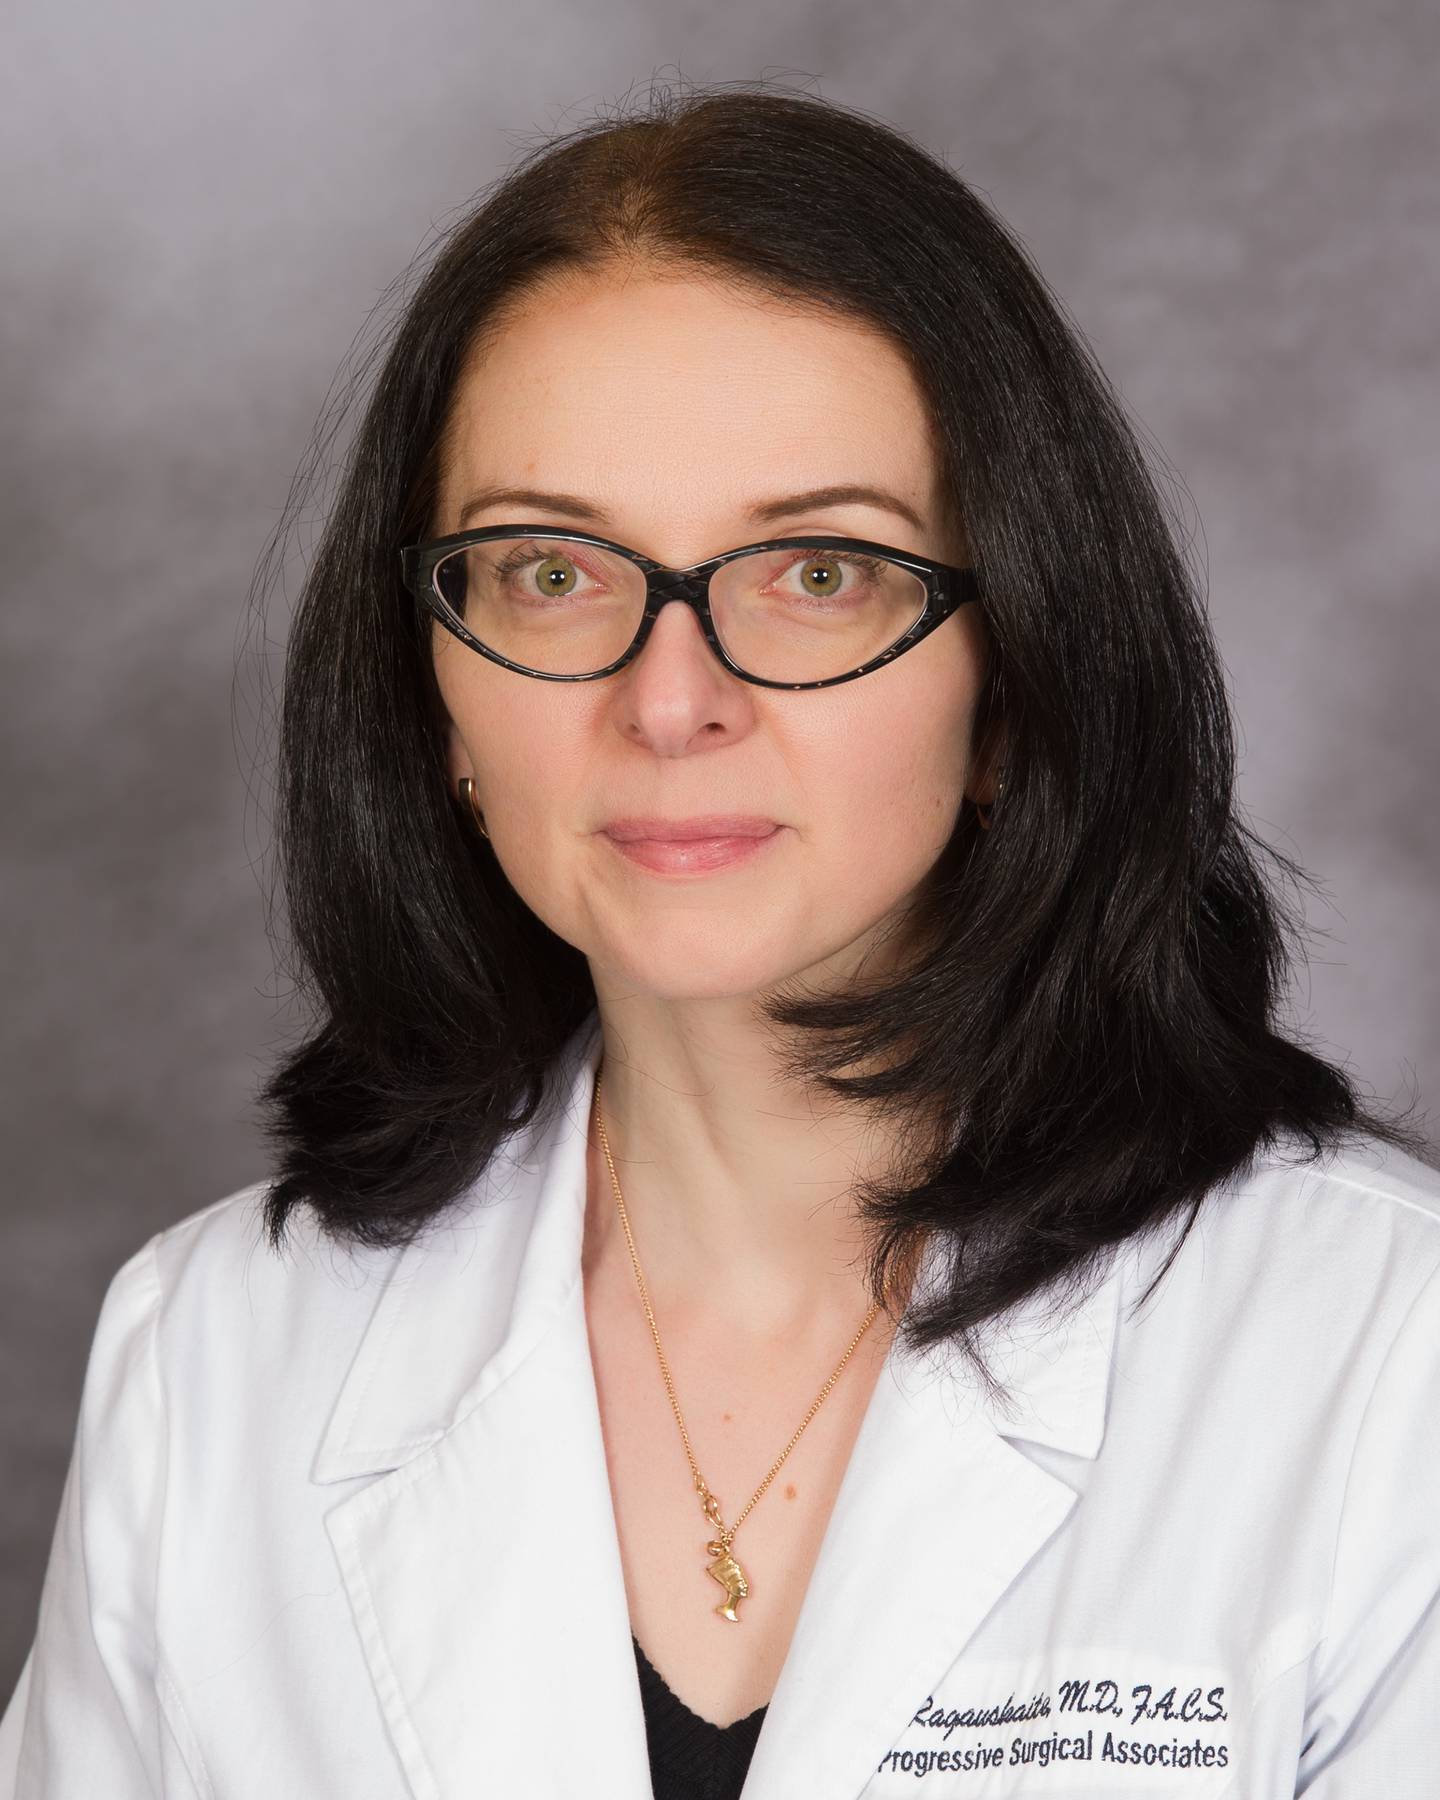 Dr. Laura Ragauskaite is the medical director of the Silver Cross Hospital Breast Center in New Lenox.